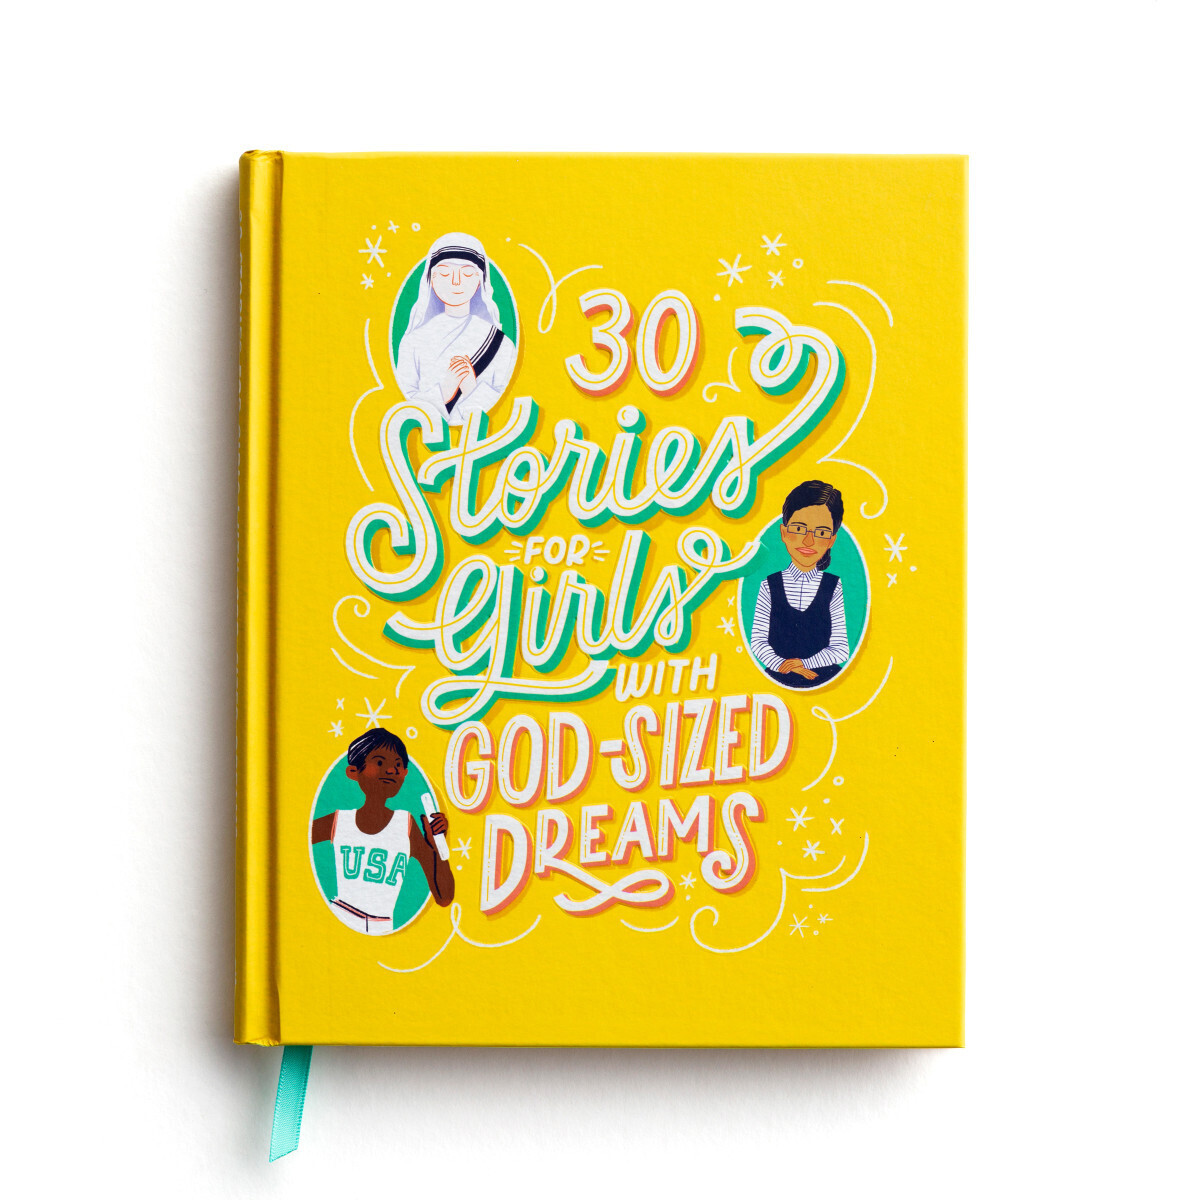 30 Stories for Girls with God-Sized Dreams